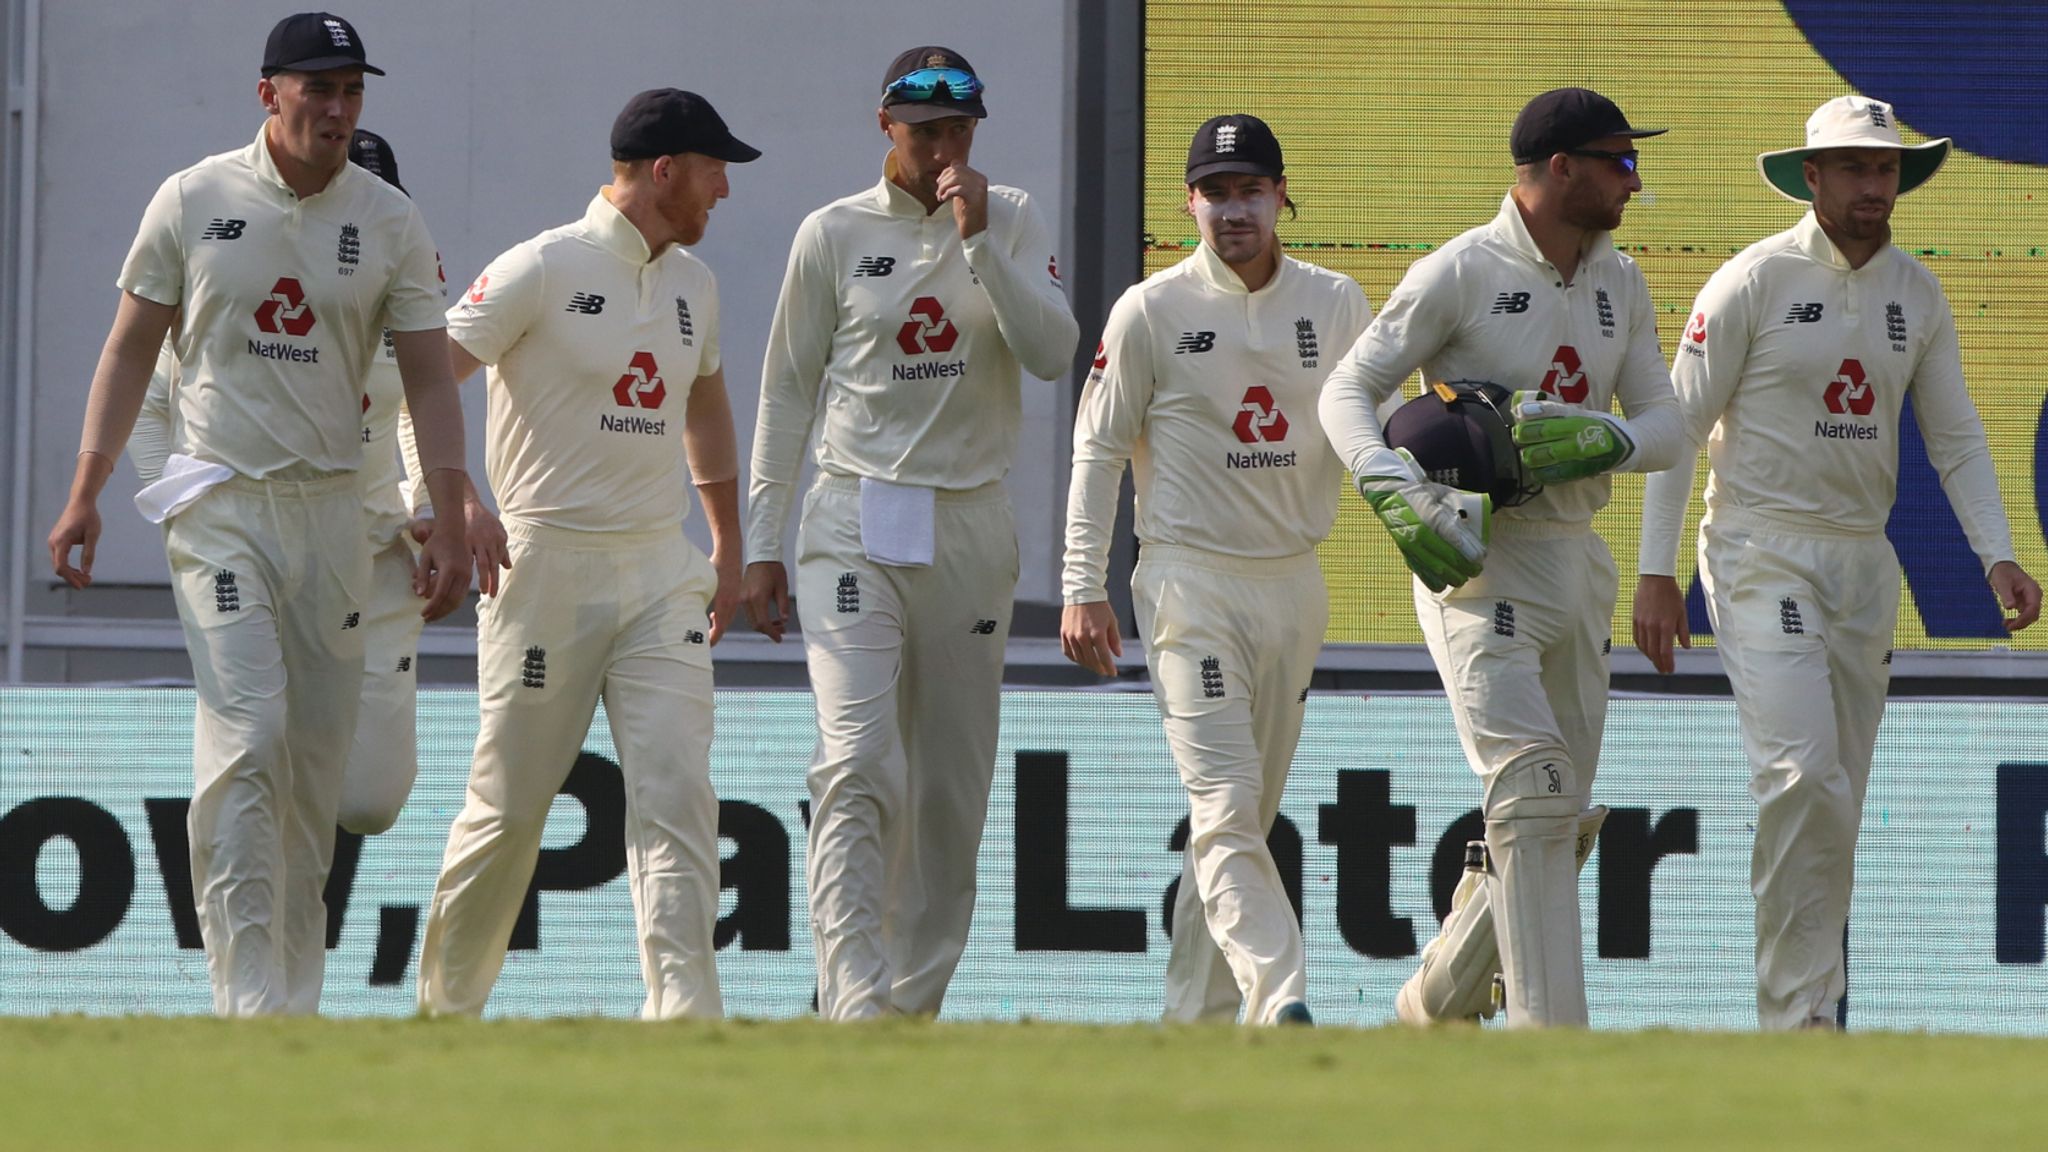 India vs England: Joe Root's men eyeing famous victory with first Test poised for thrilling climax | Cricket News | Sky Sports